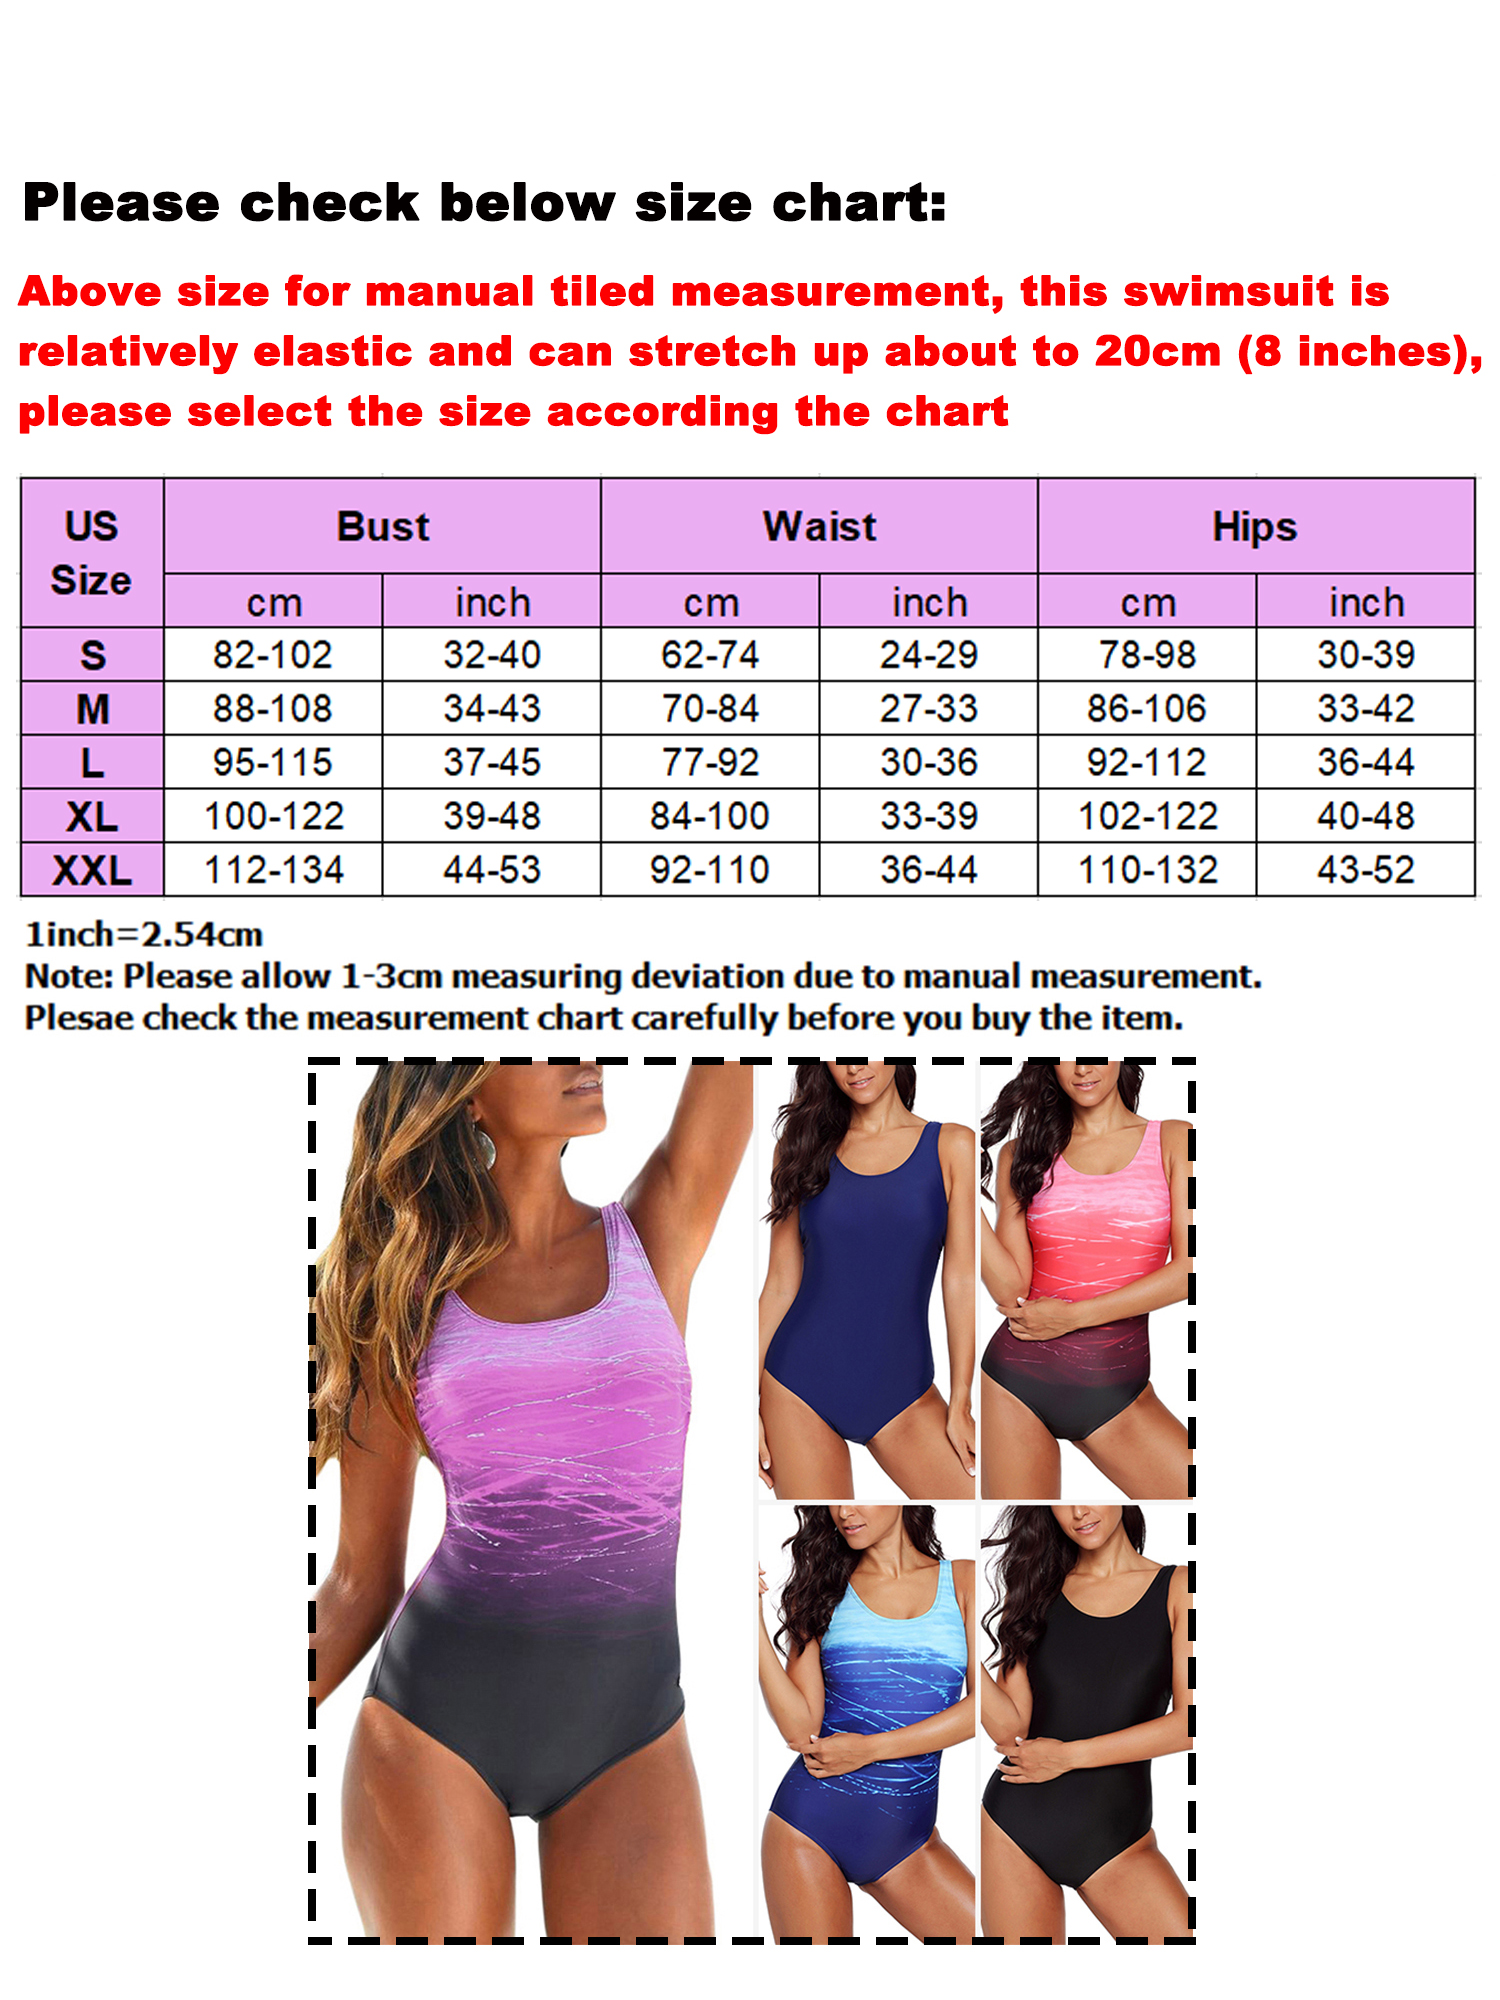 Sexy Dance Women's One Piece Swimsuits Gradient Color Athletic Swimwear Tummy Control Monokini Bathing Suits Size Medium US 4-6 - image 2 of 5